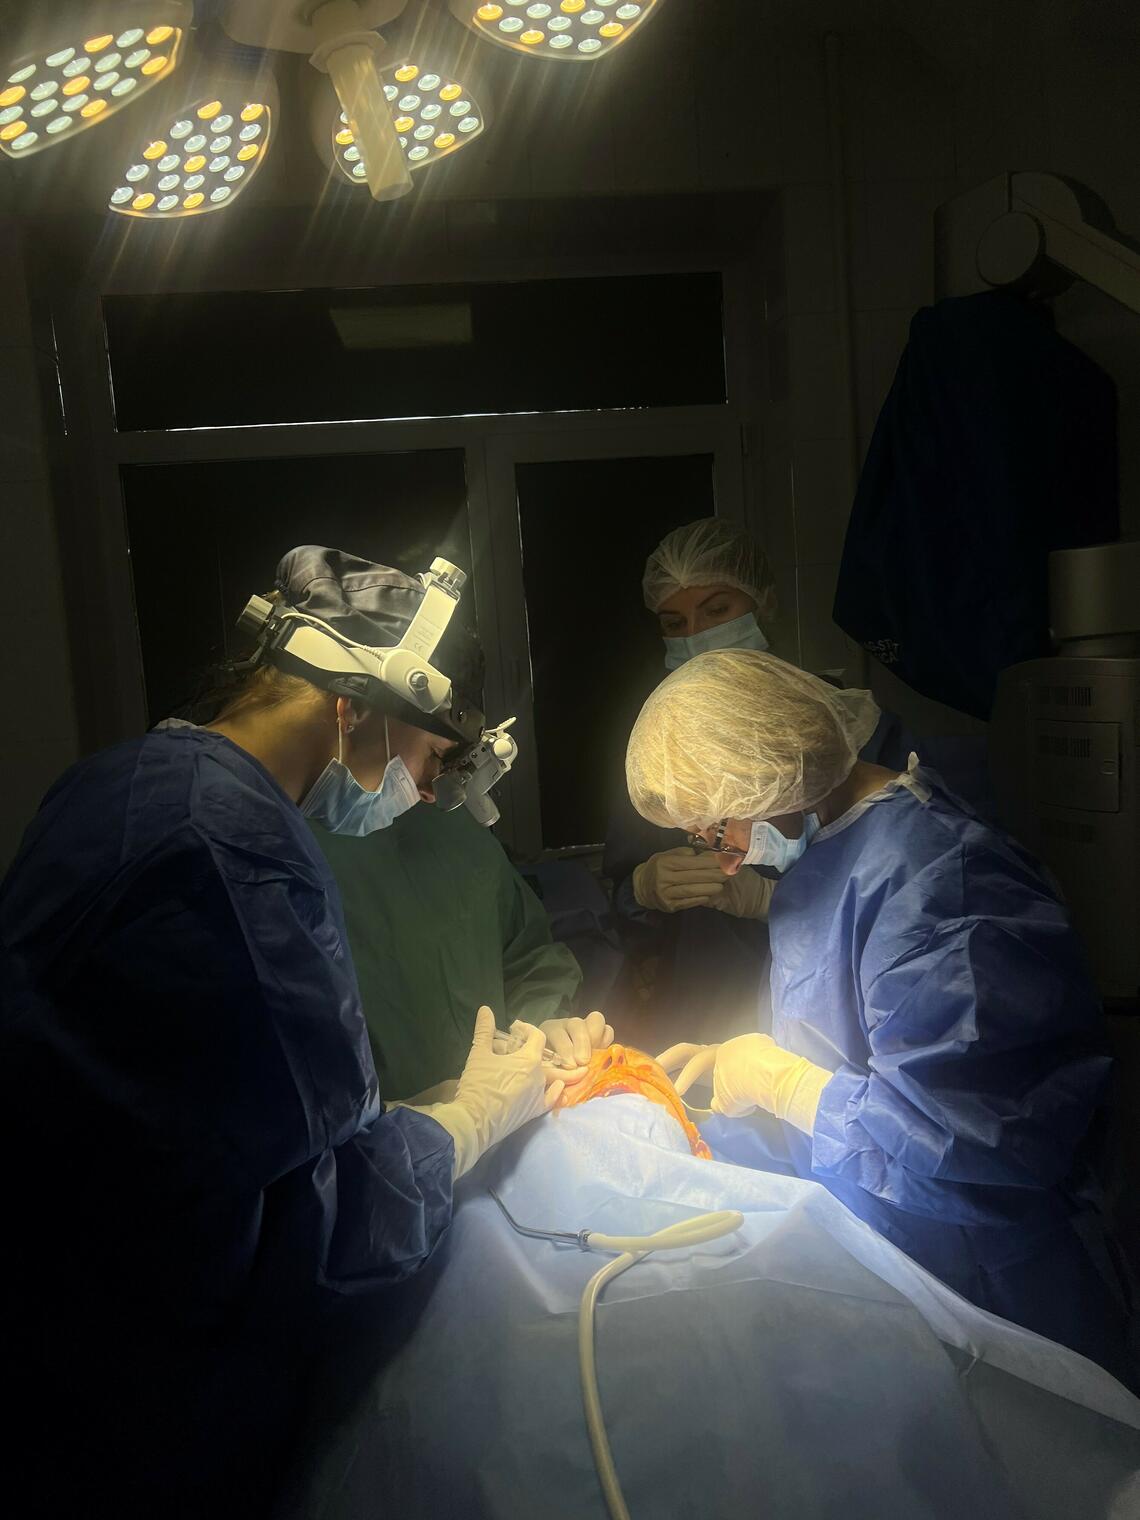 Surgeons performing surgery in the dark